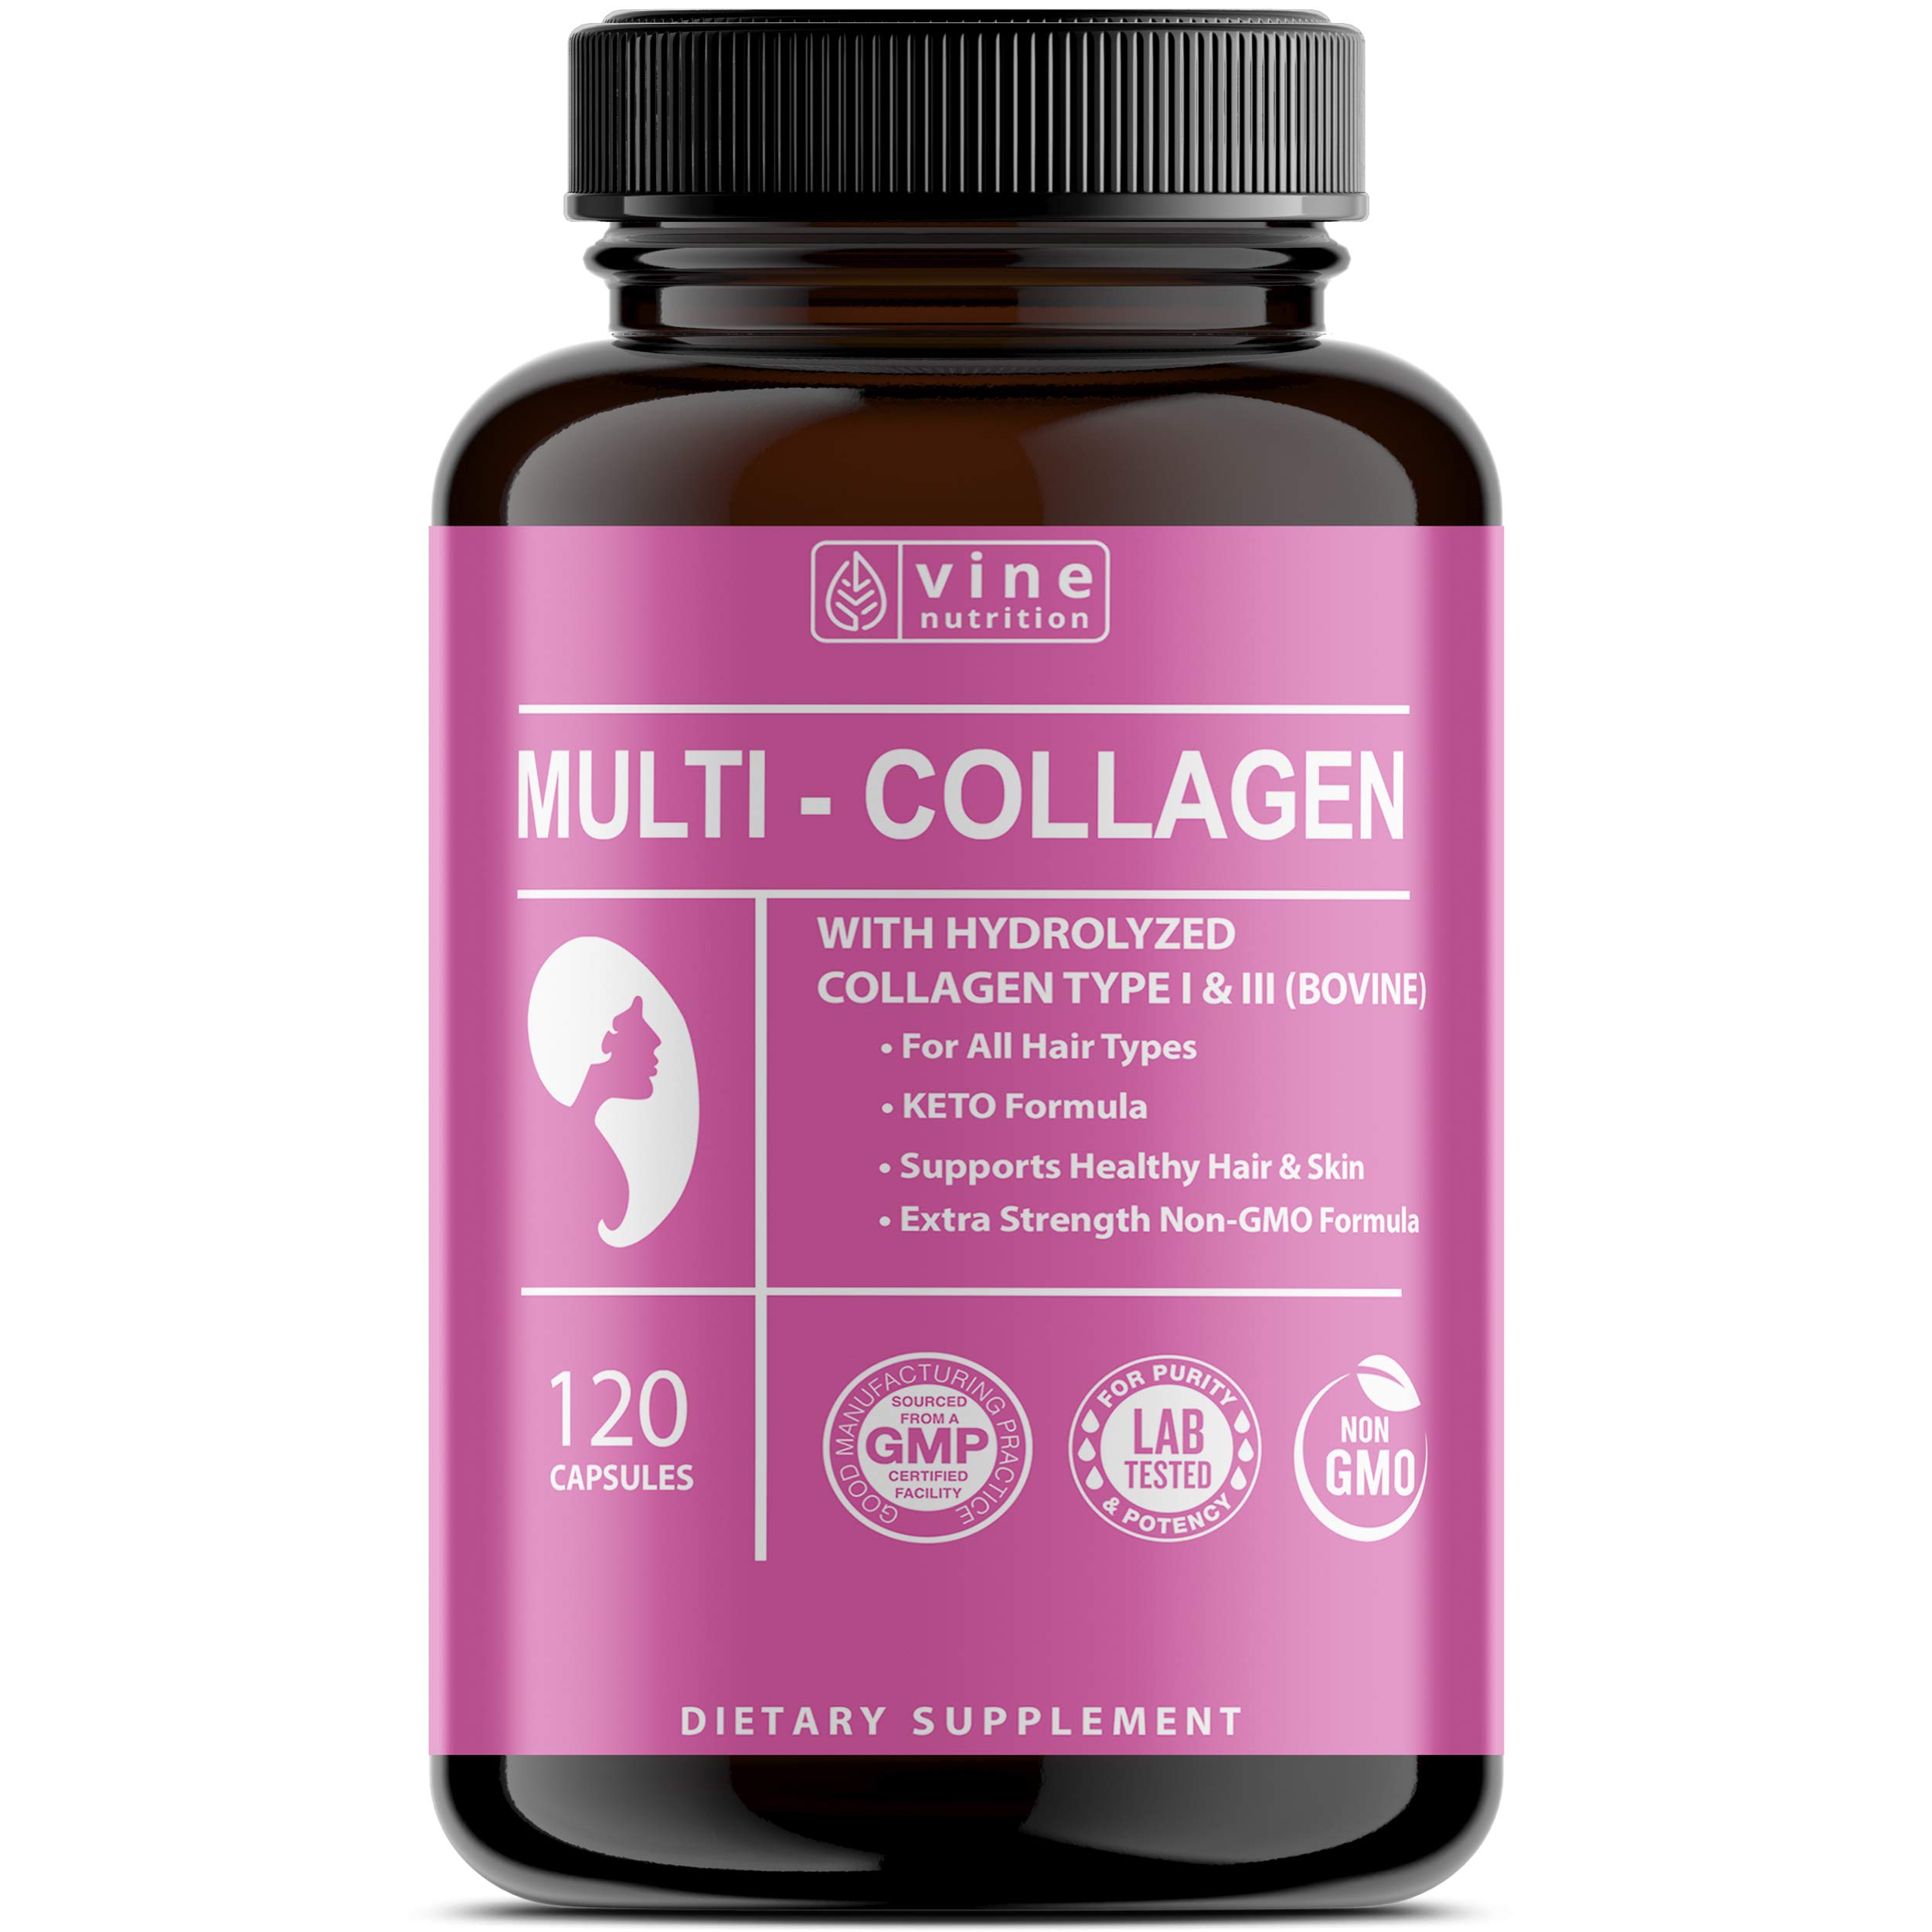 Book Cover Premium Multi Collagen Pills - Grass Fed Collagen Peptides for Anti-Aging, Hair, Skin & Nails. Hydrolyzed Collagen Capsules for Women. Powerful Collagen Supplements for Women - Vine Nutrition 120CT